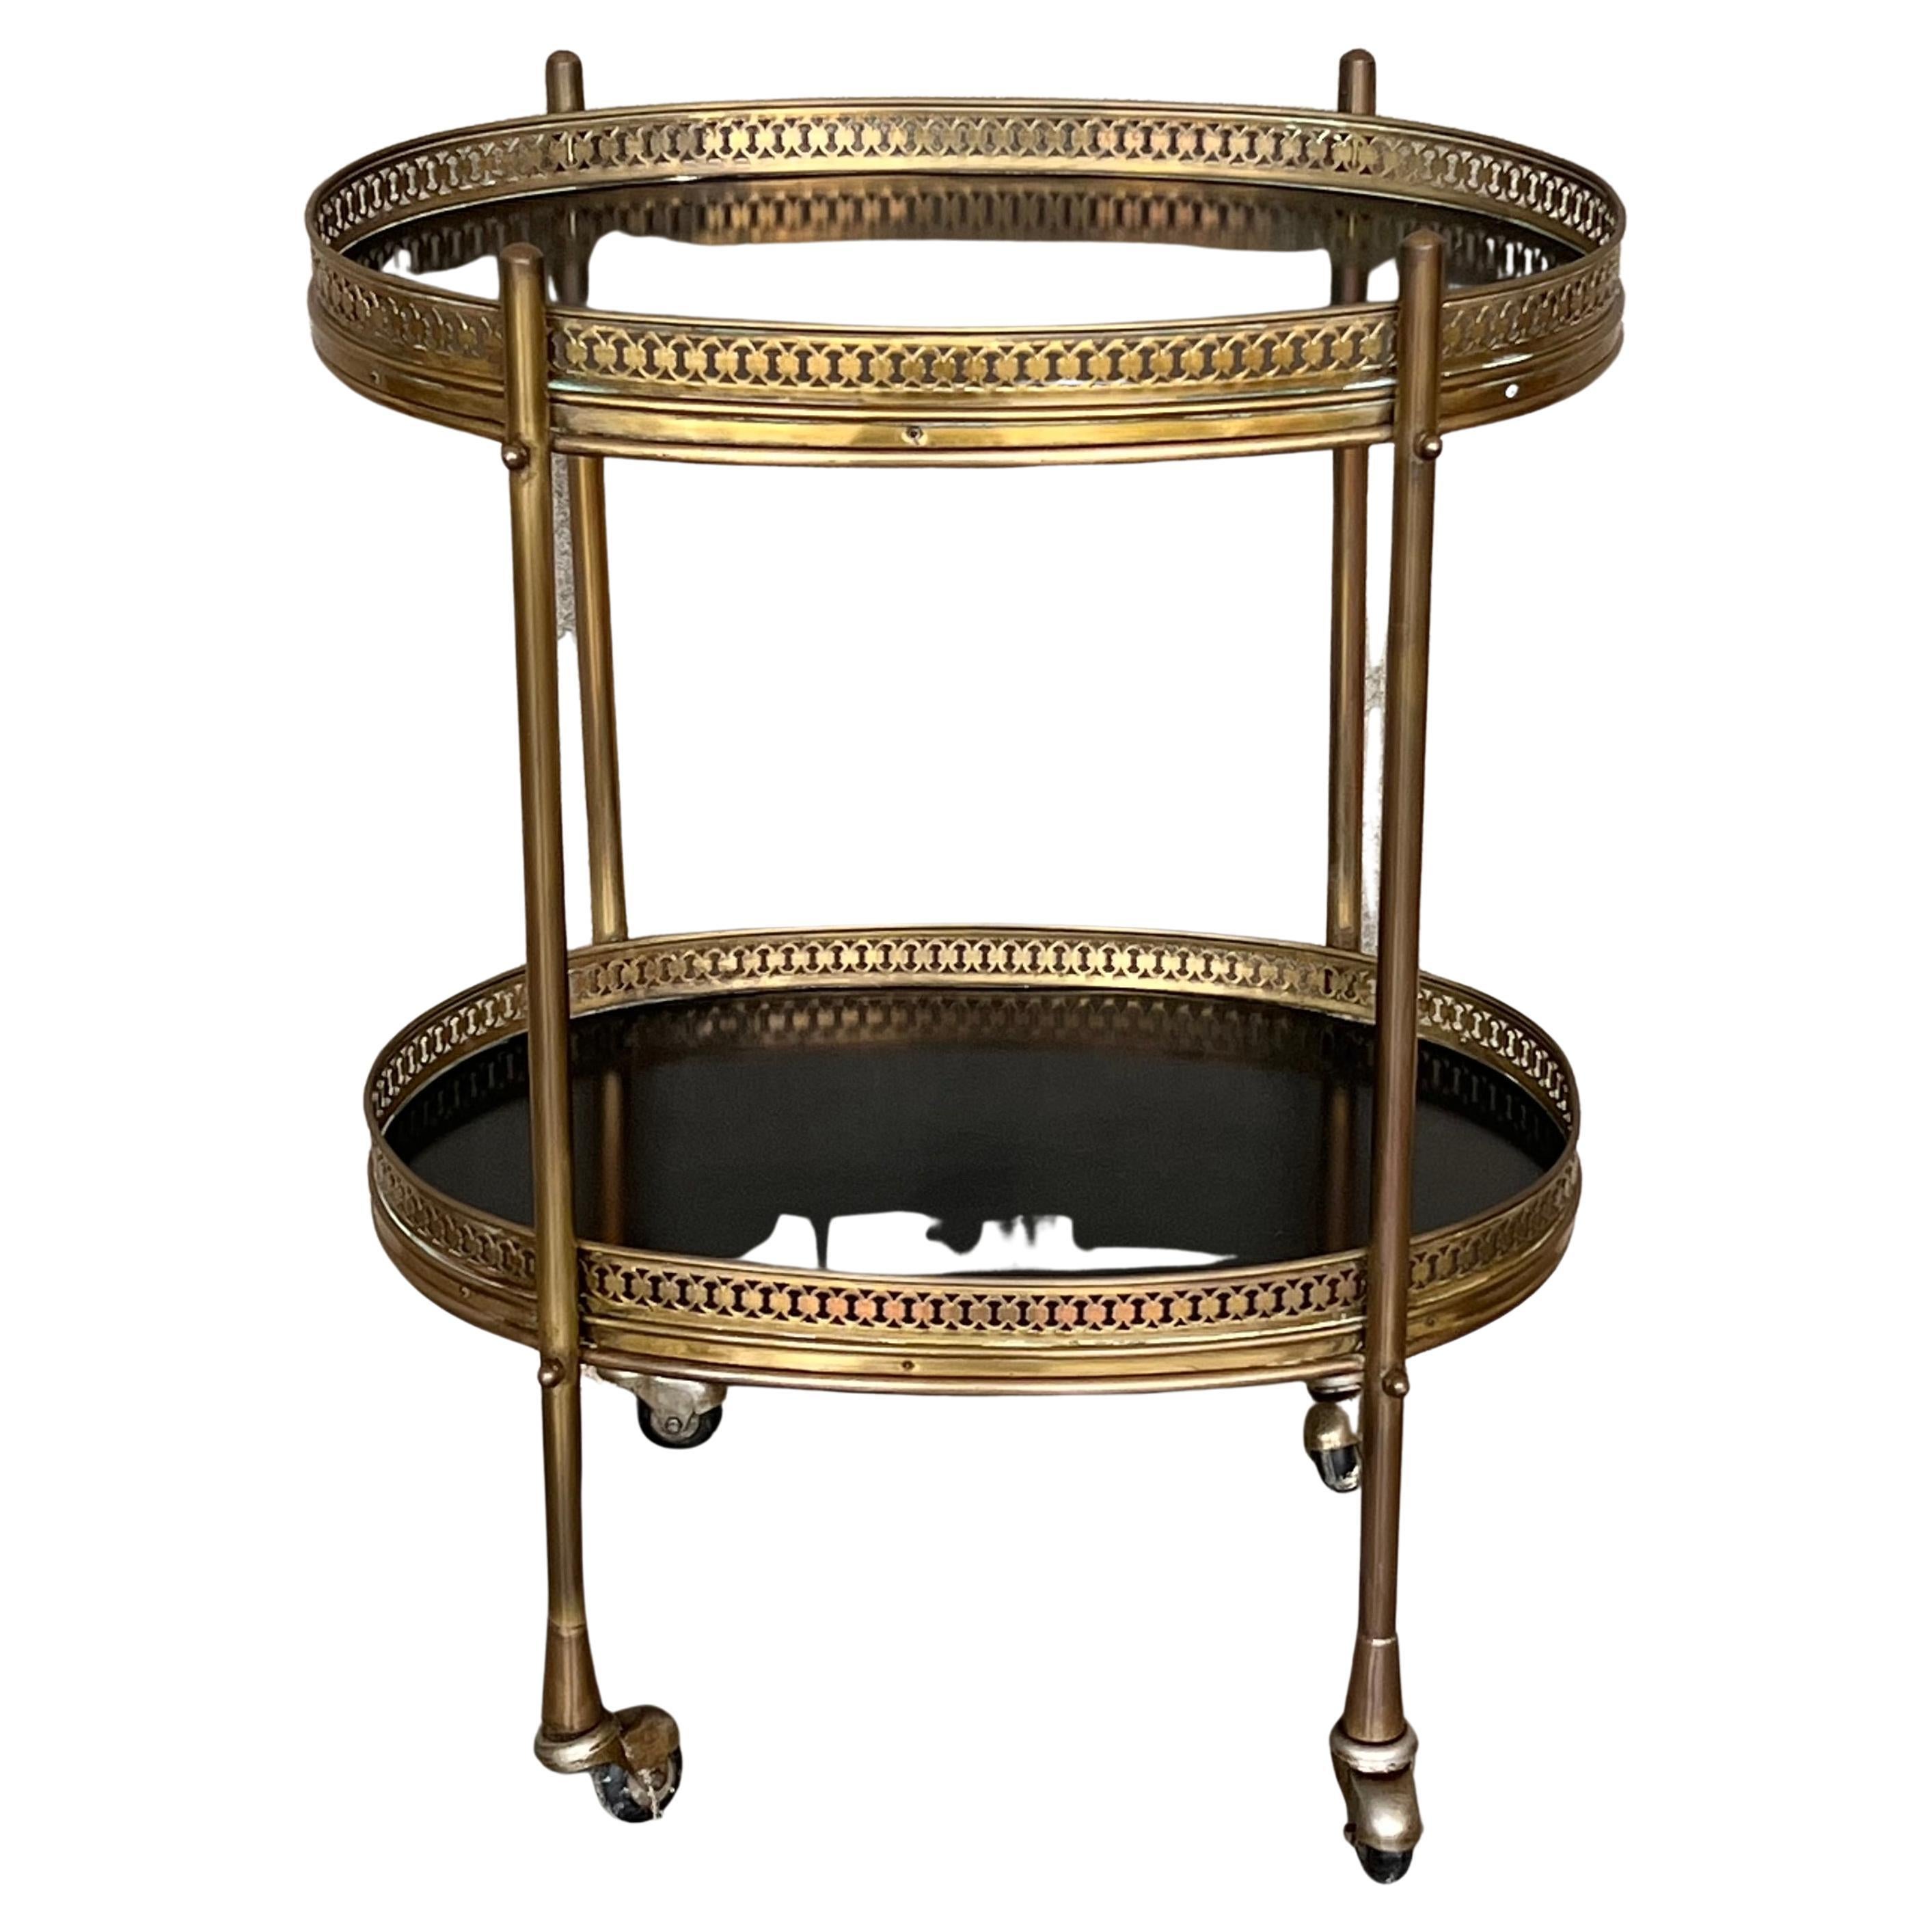 Baroque Revival Table with Two Removable Brass Trays, France, circa 1940